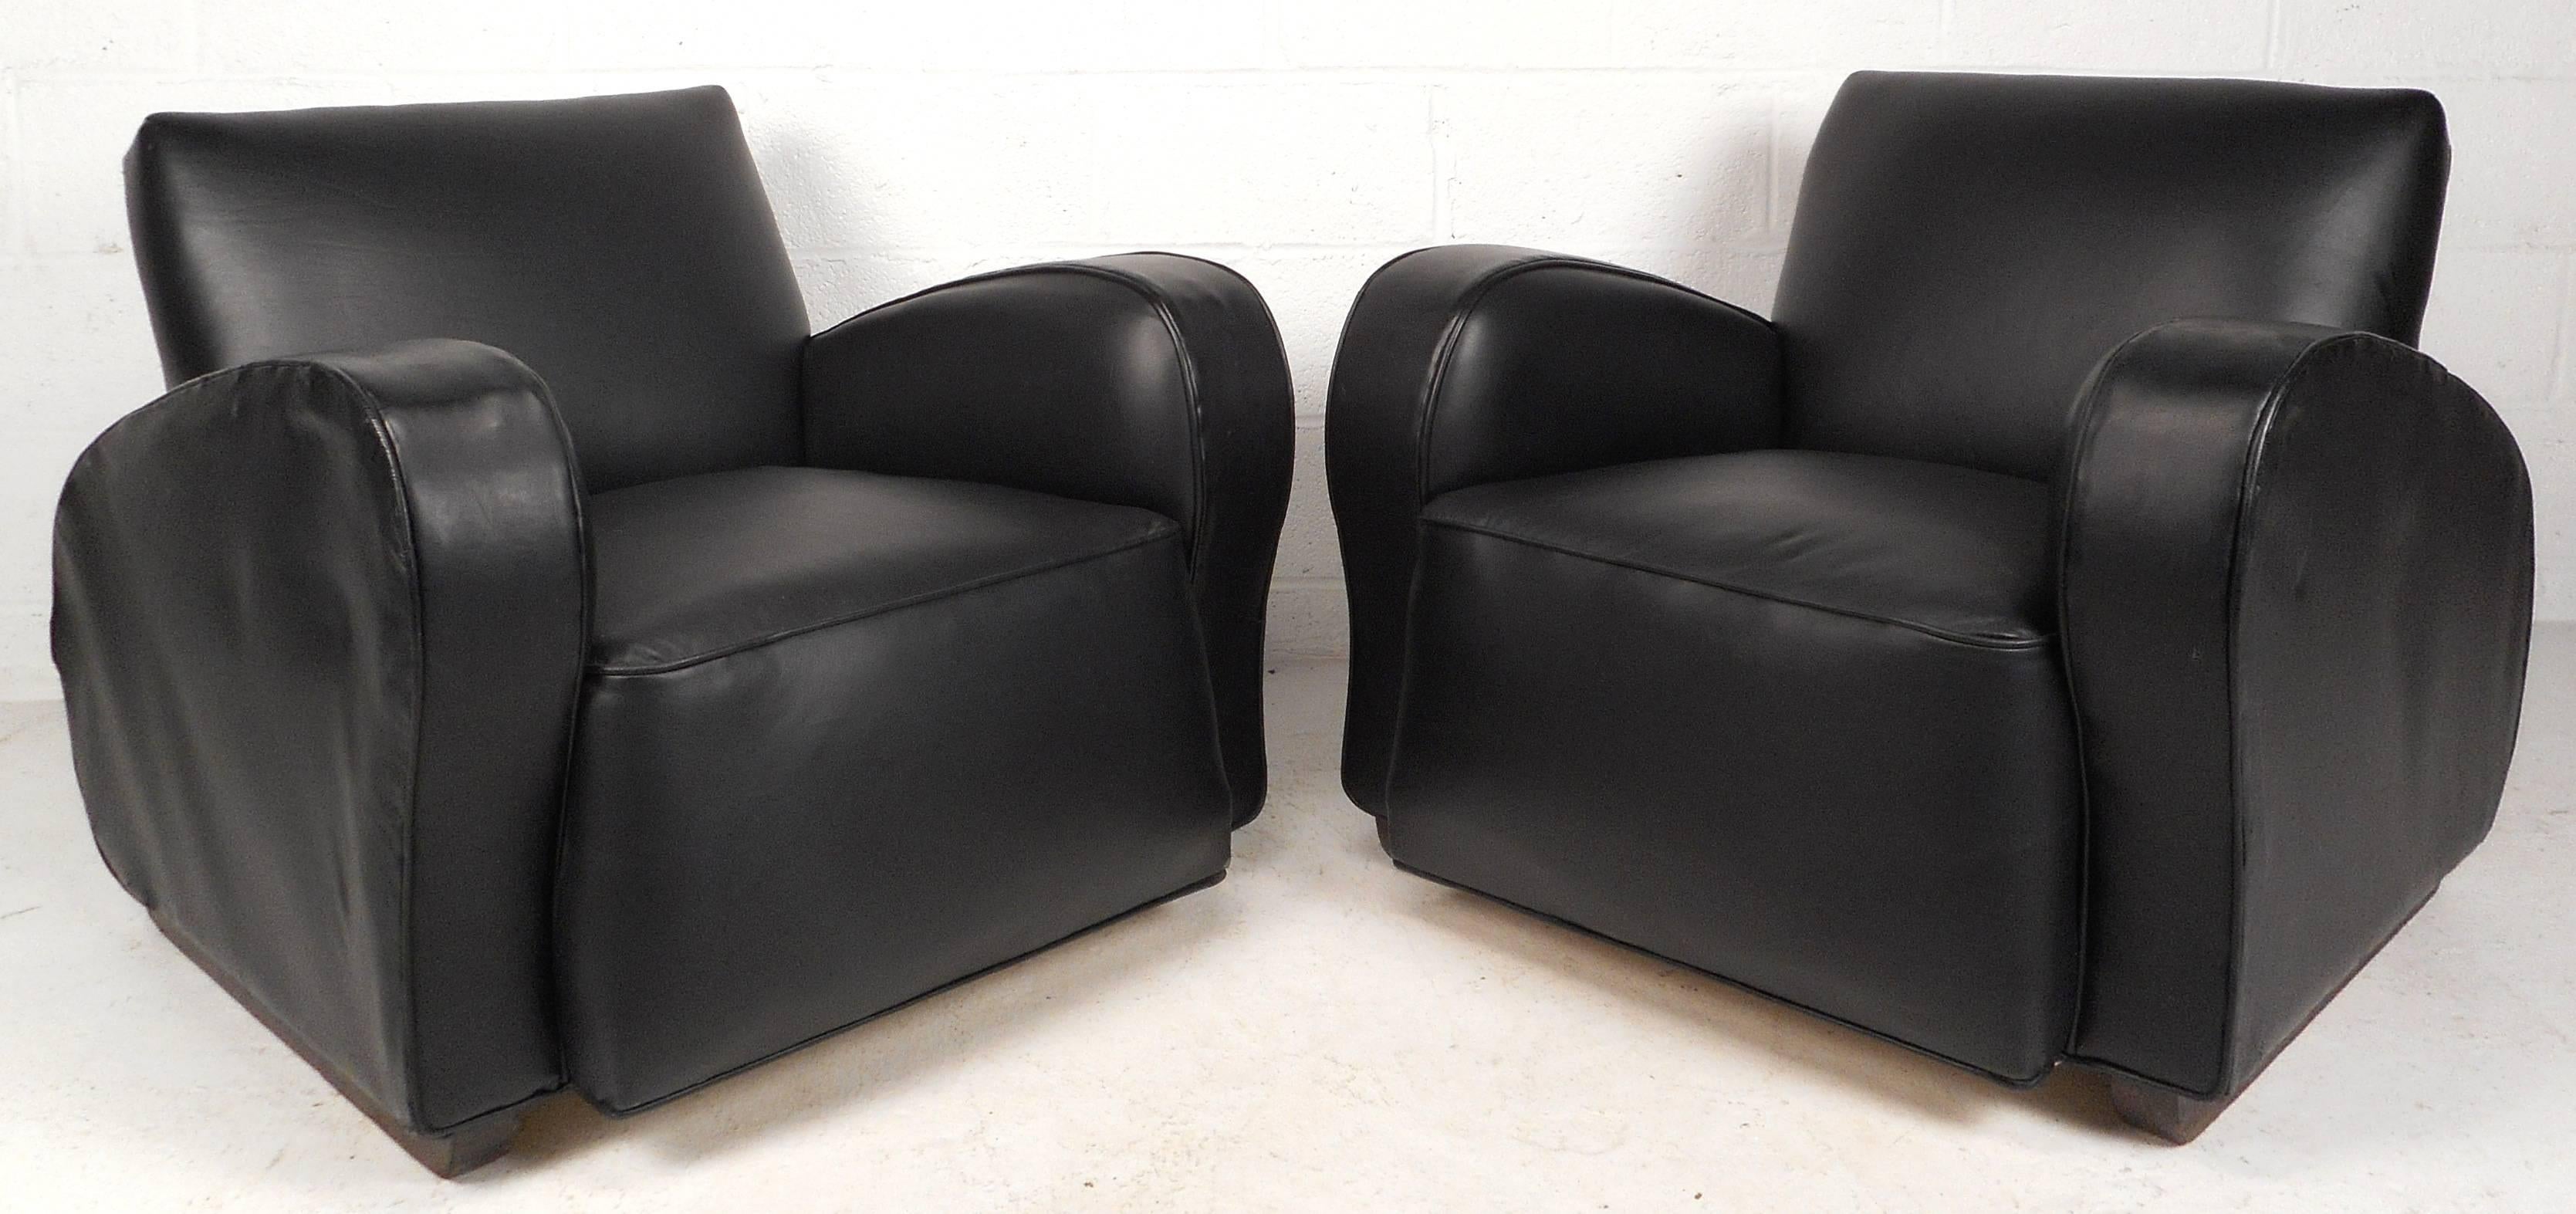 Impressive pair of contemporary modern Art Deco style lounge chairs feature black vinyl upholstery and unique sculpted arm rests. The shapely design is sure to provide the utmost comfort and style in any modern interior. Please confirm item location